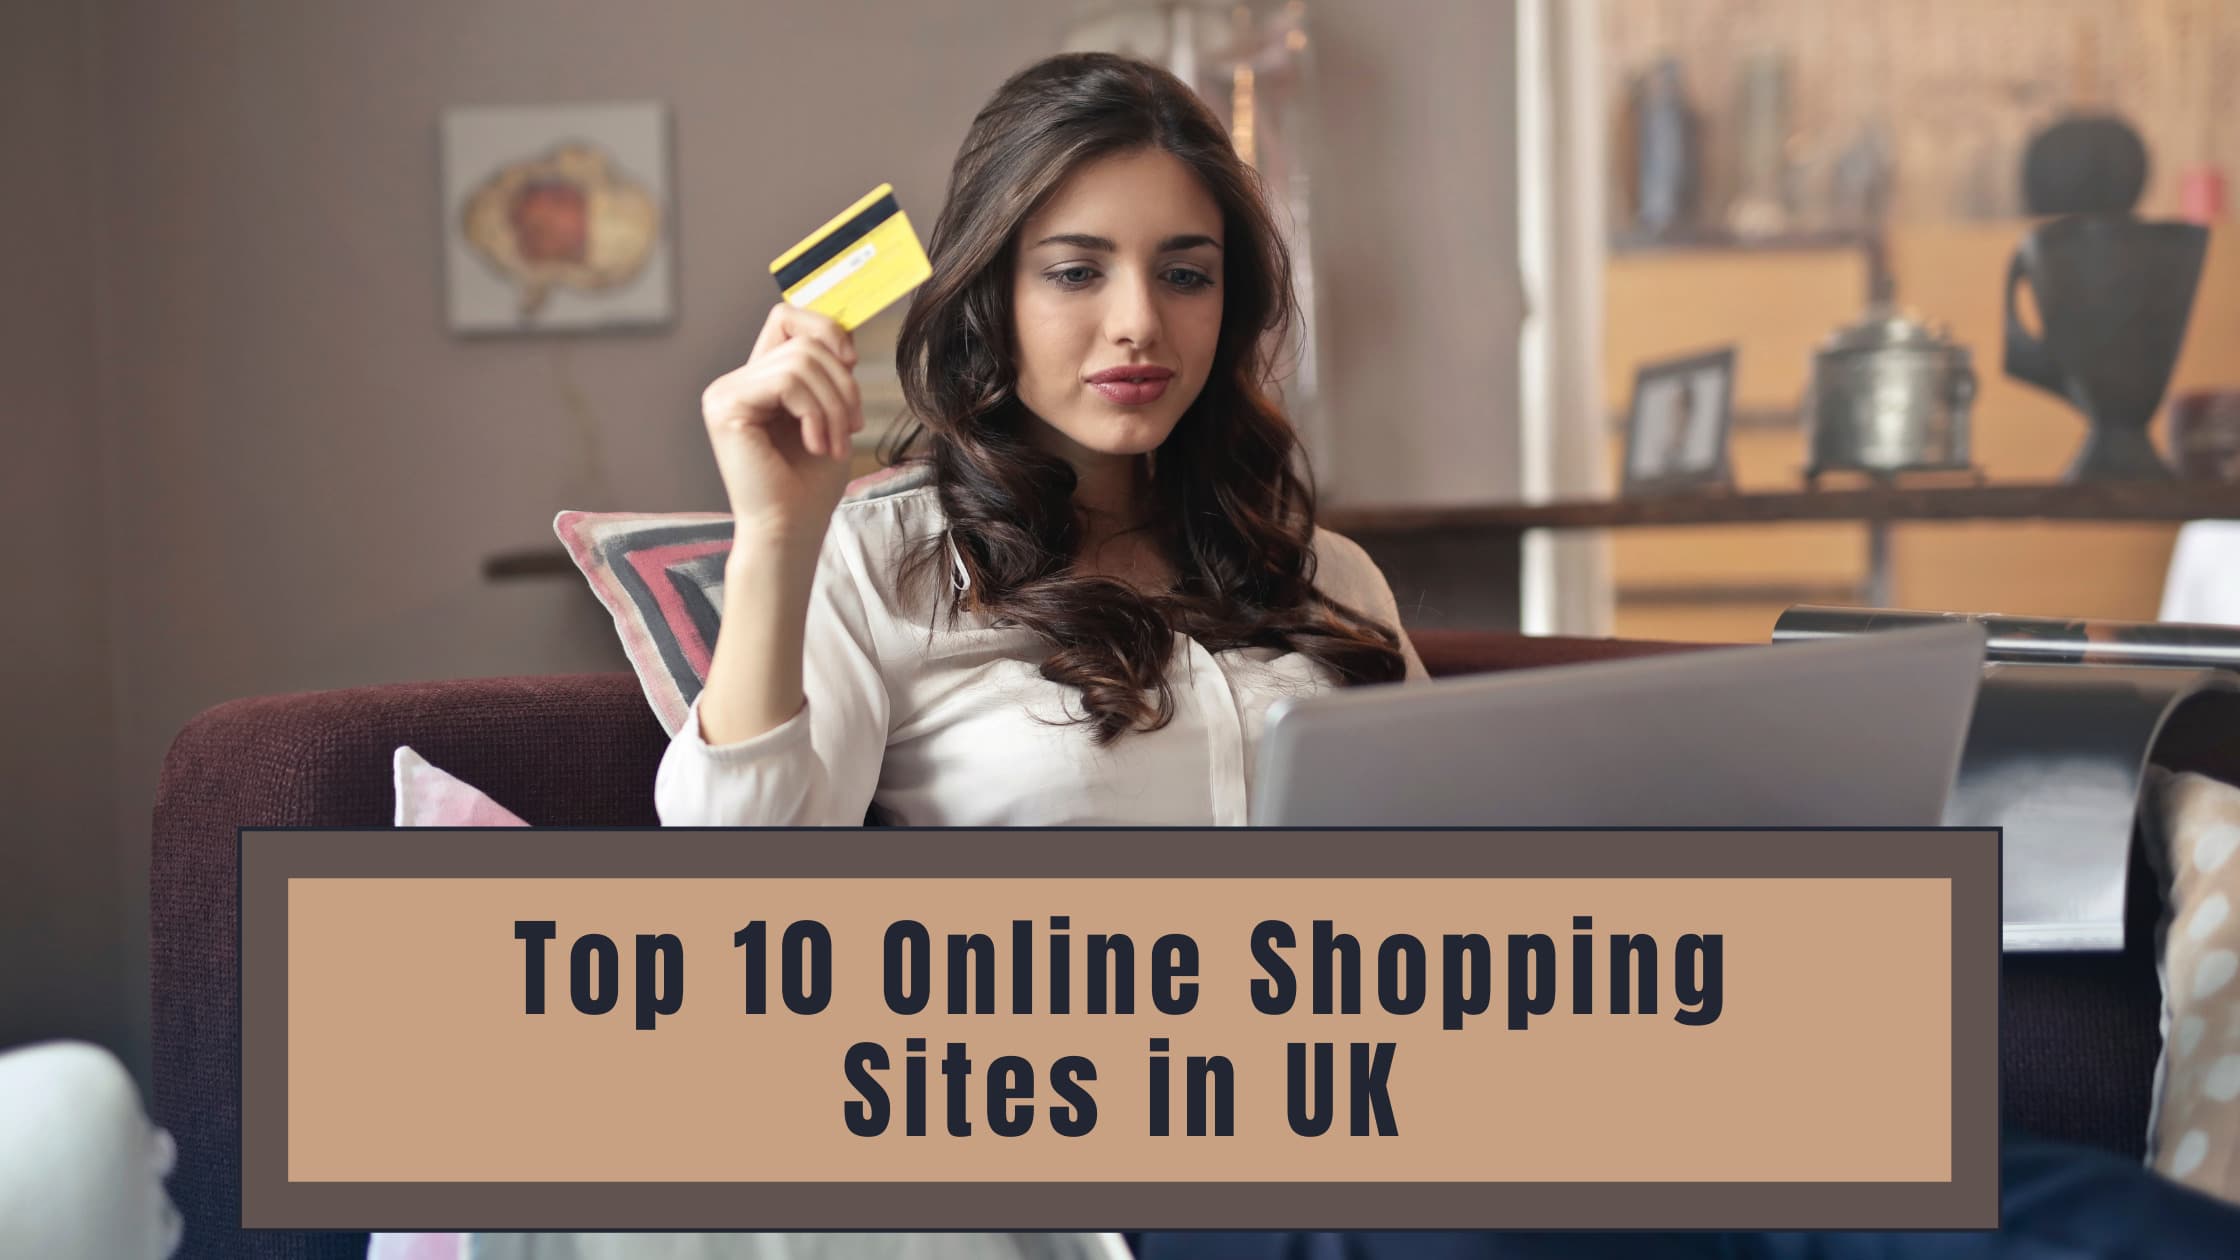 Top 10 Online Shopping Sites in UK